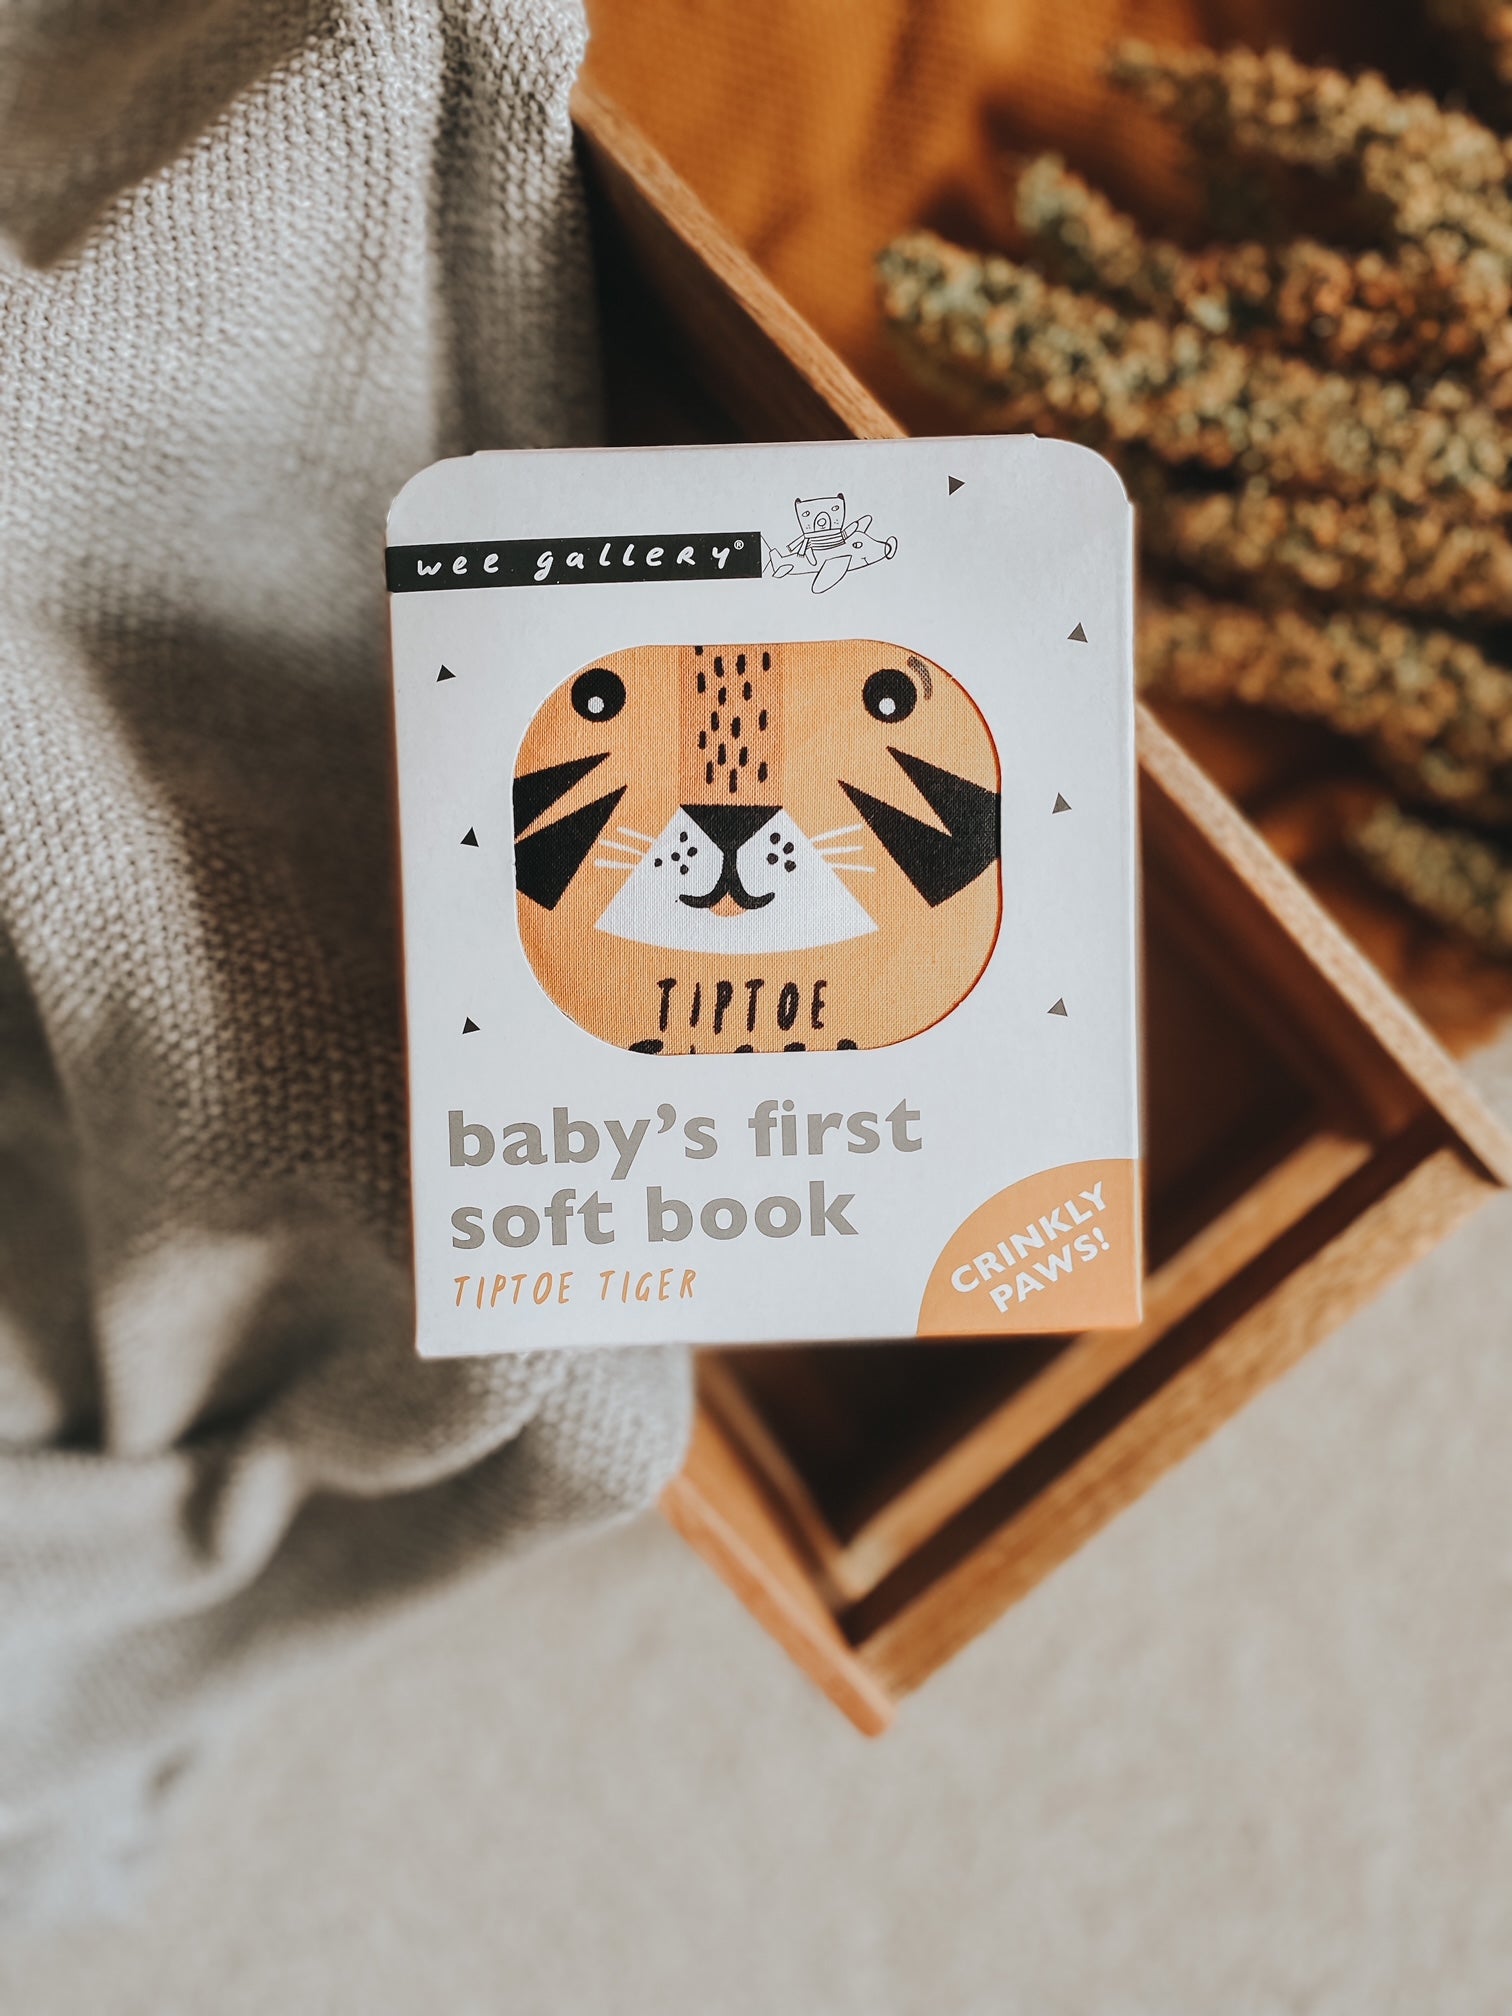 Wee Gallery: Baby's First Soft Books